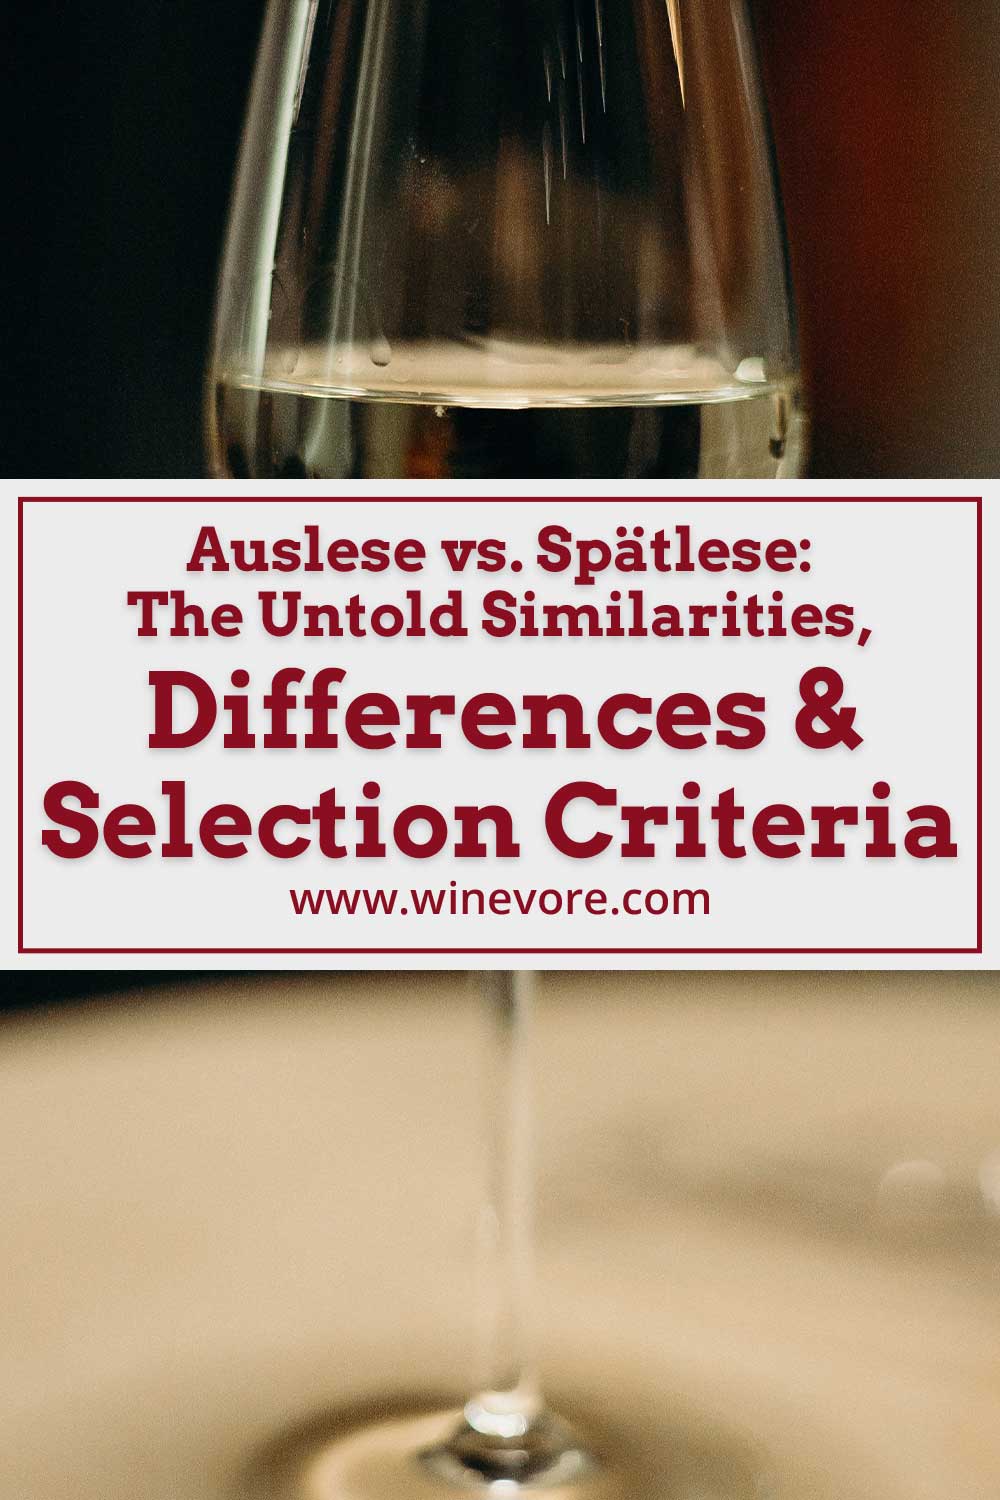 Close up of a wine glass with white wine in it - Auslese vs. Spätlese: The Similarities, Differences & Selection Criteria